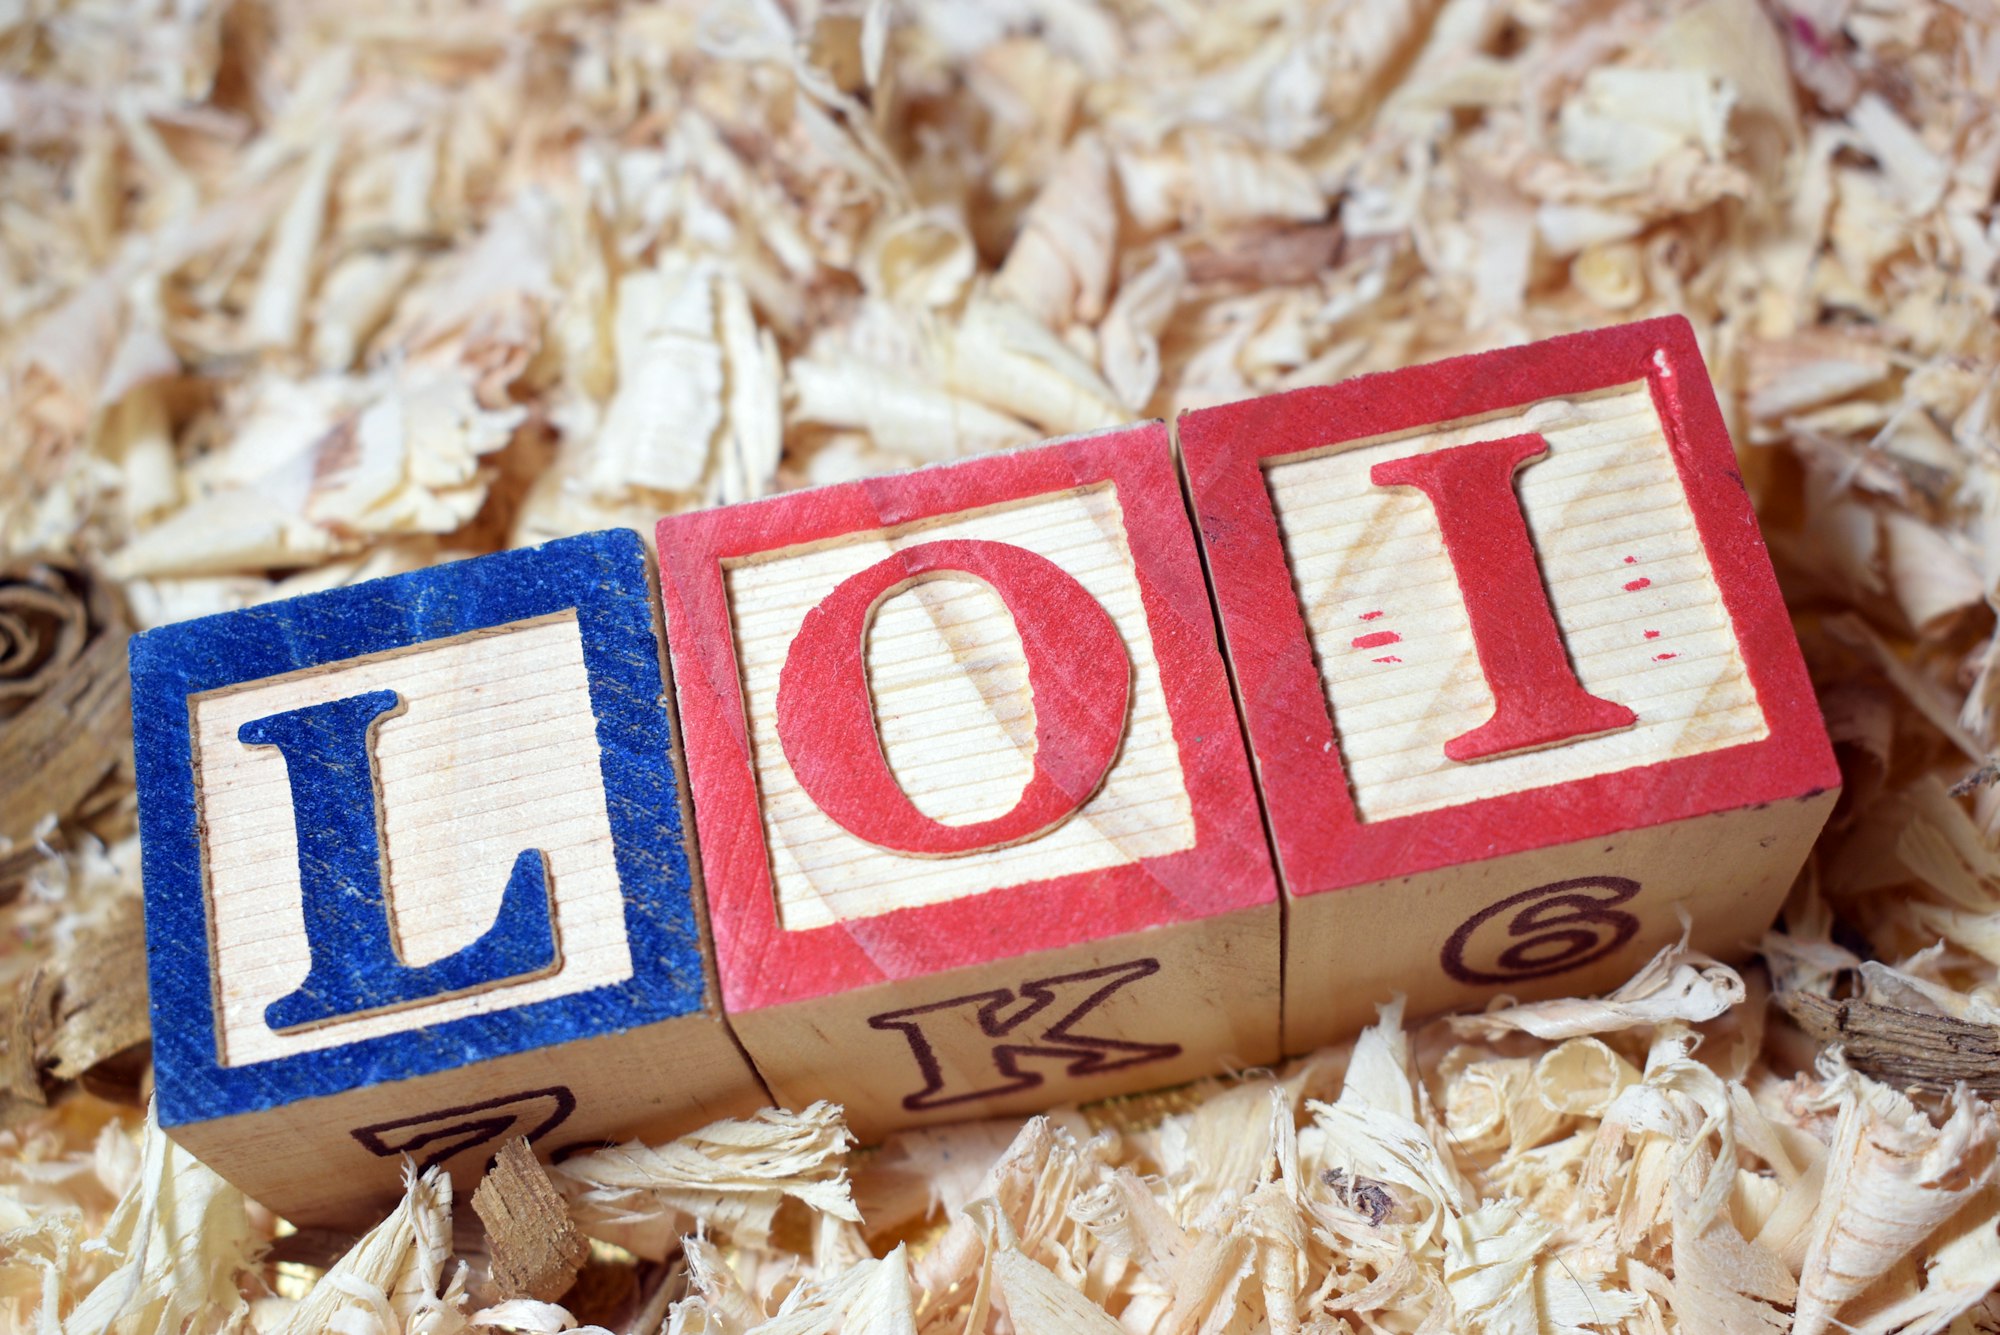 Letter Of Intent (LOI) acronym arranged with wooden blocks